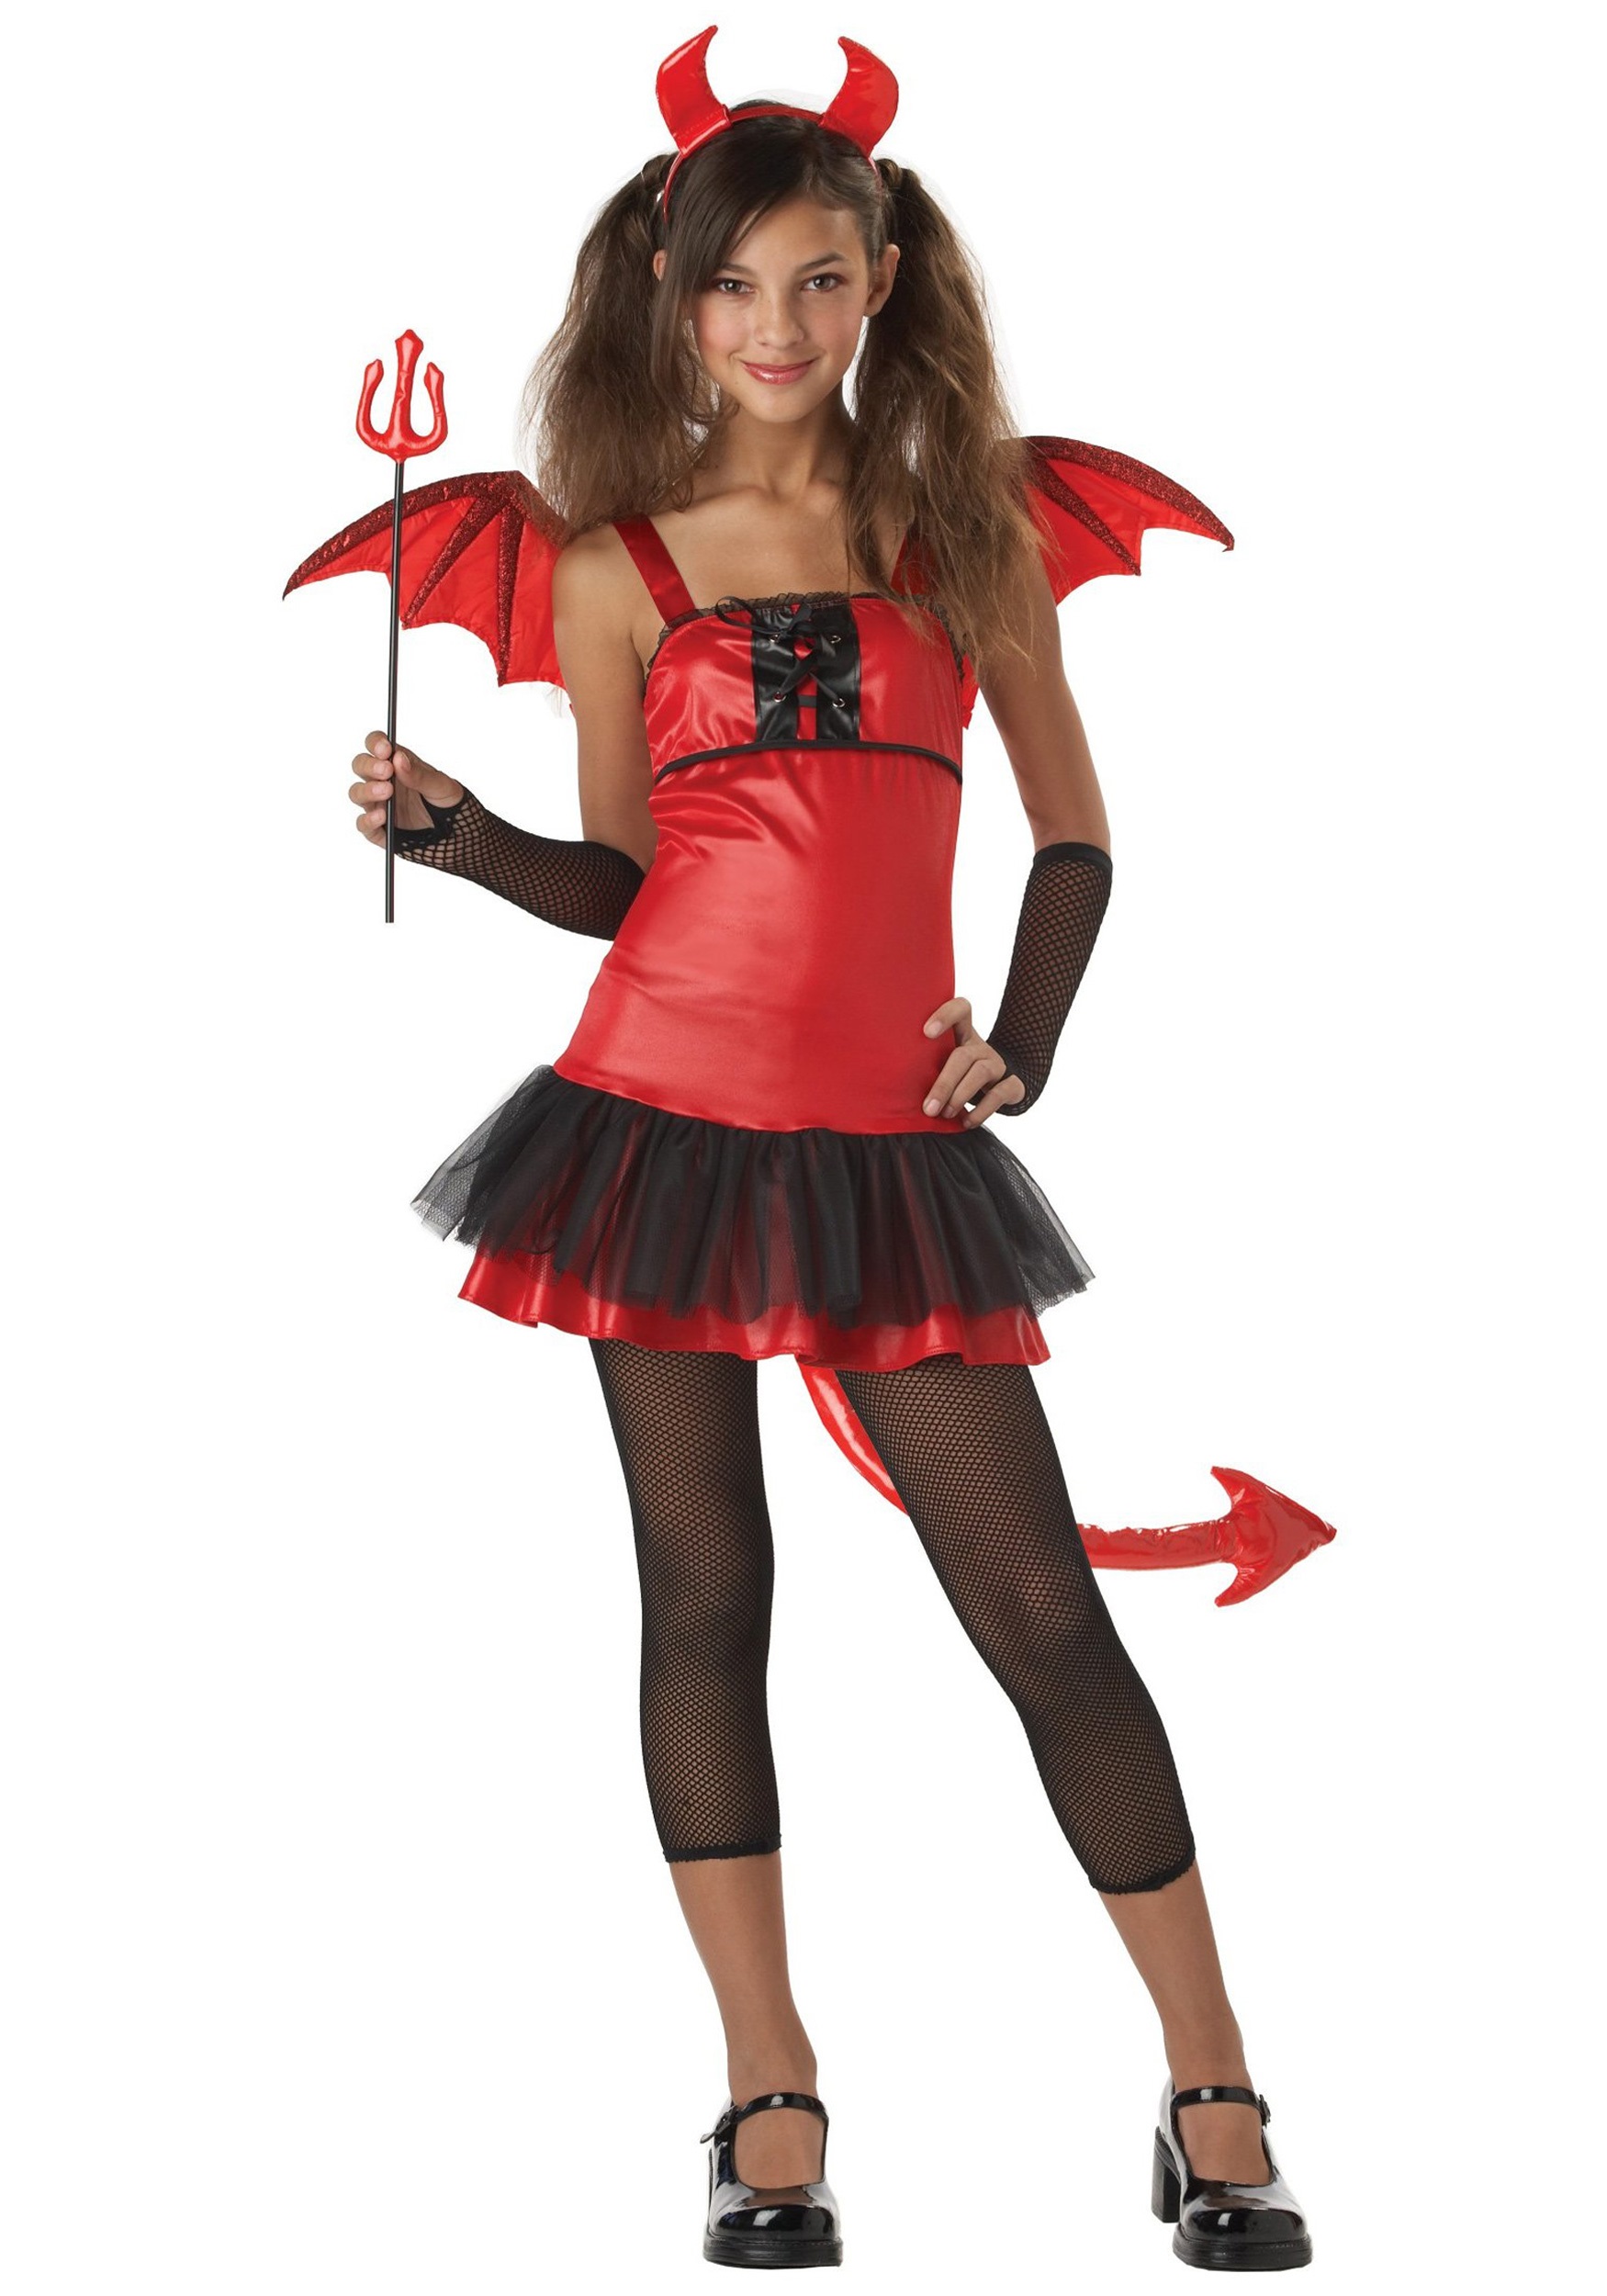 Teen Devil Costume | Have a great Halloween this year when you wear our Tee...